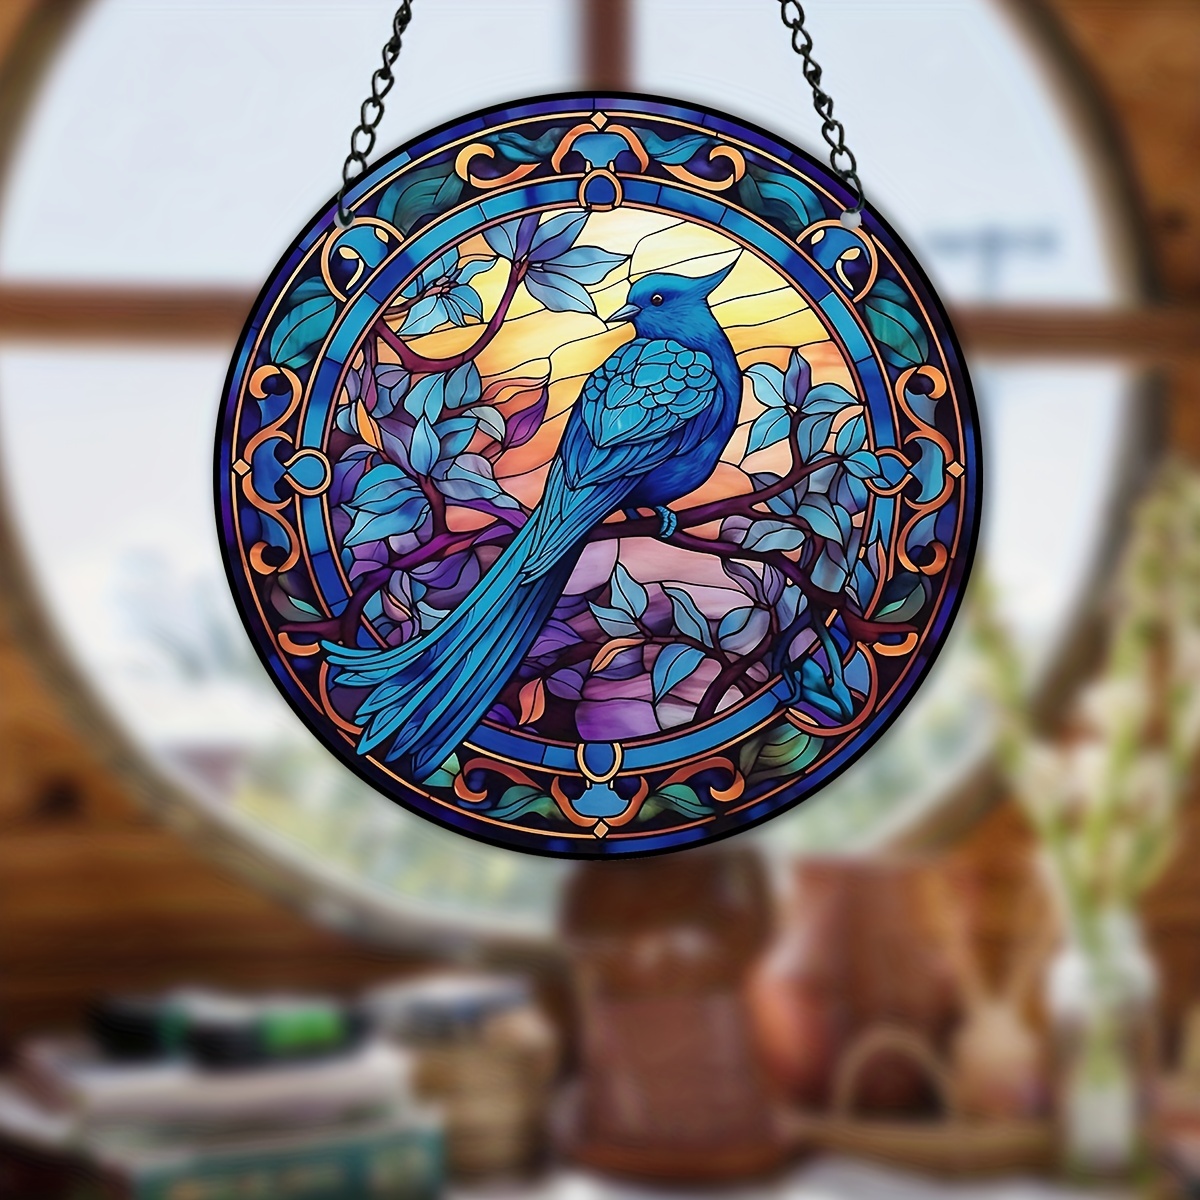 1pc Mini Stained Bird Window Hanging Suncatcher, Bird Stained Glass Window  Hanging, Spring Bird Variety Of Painted Window Panels, Stained Glass Bird H